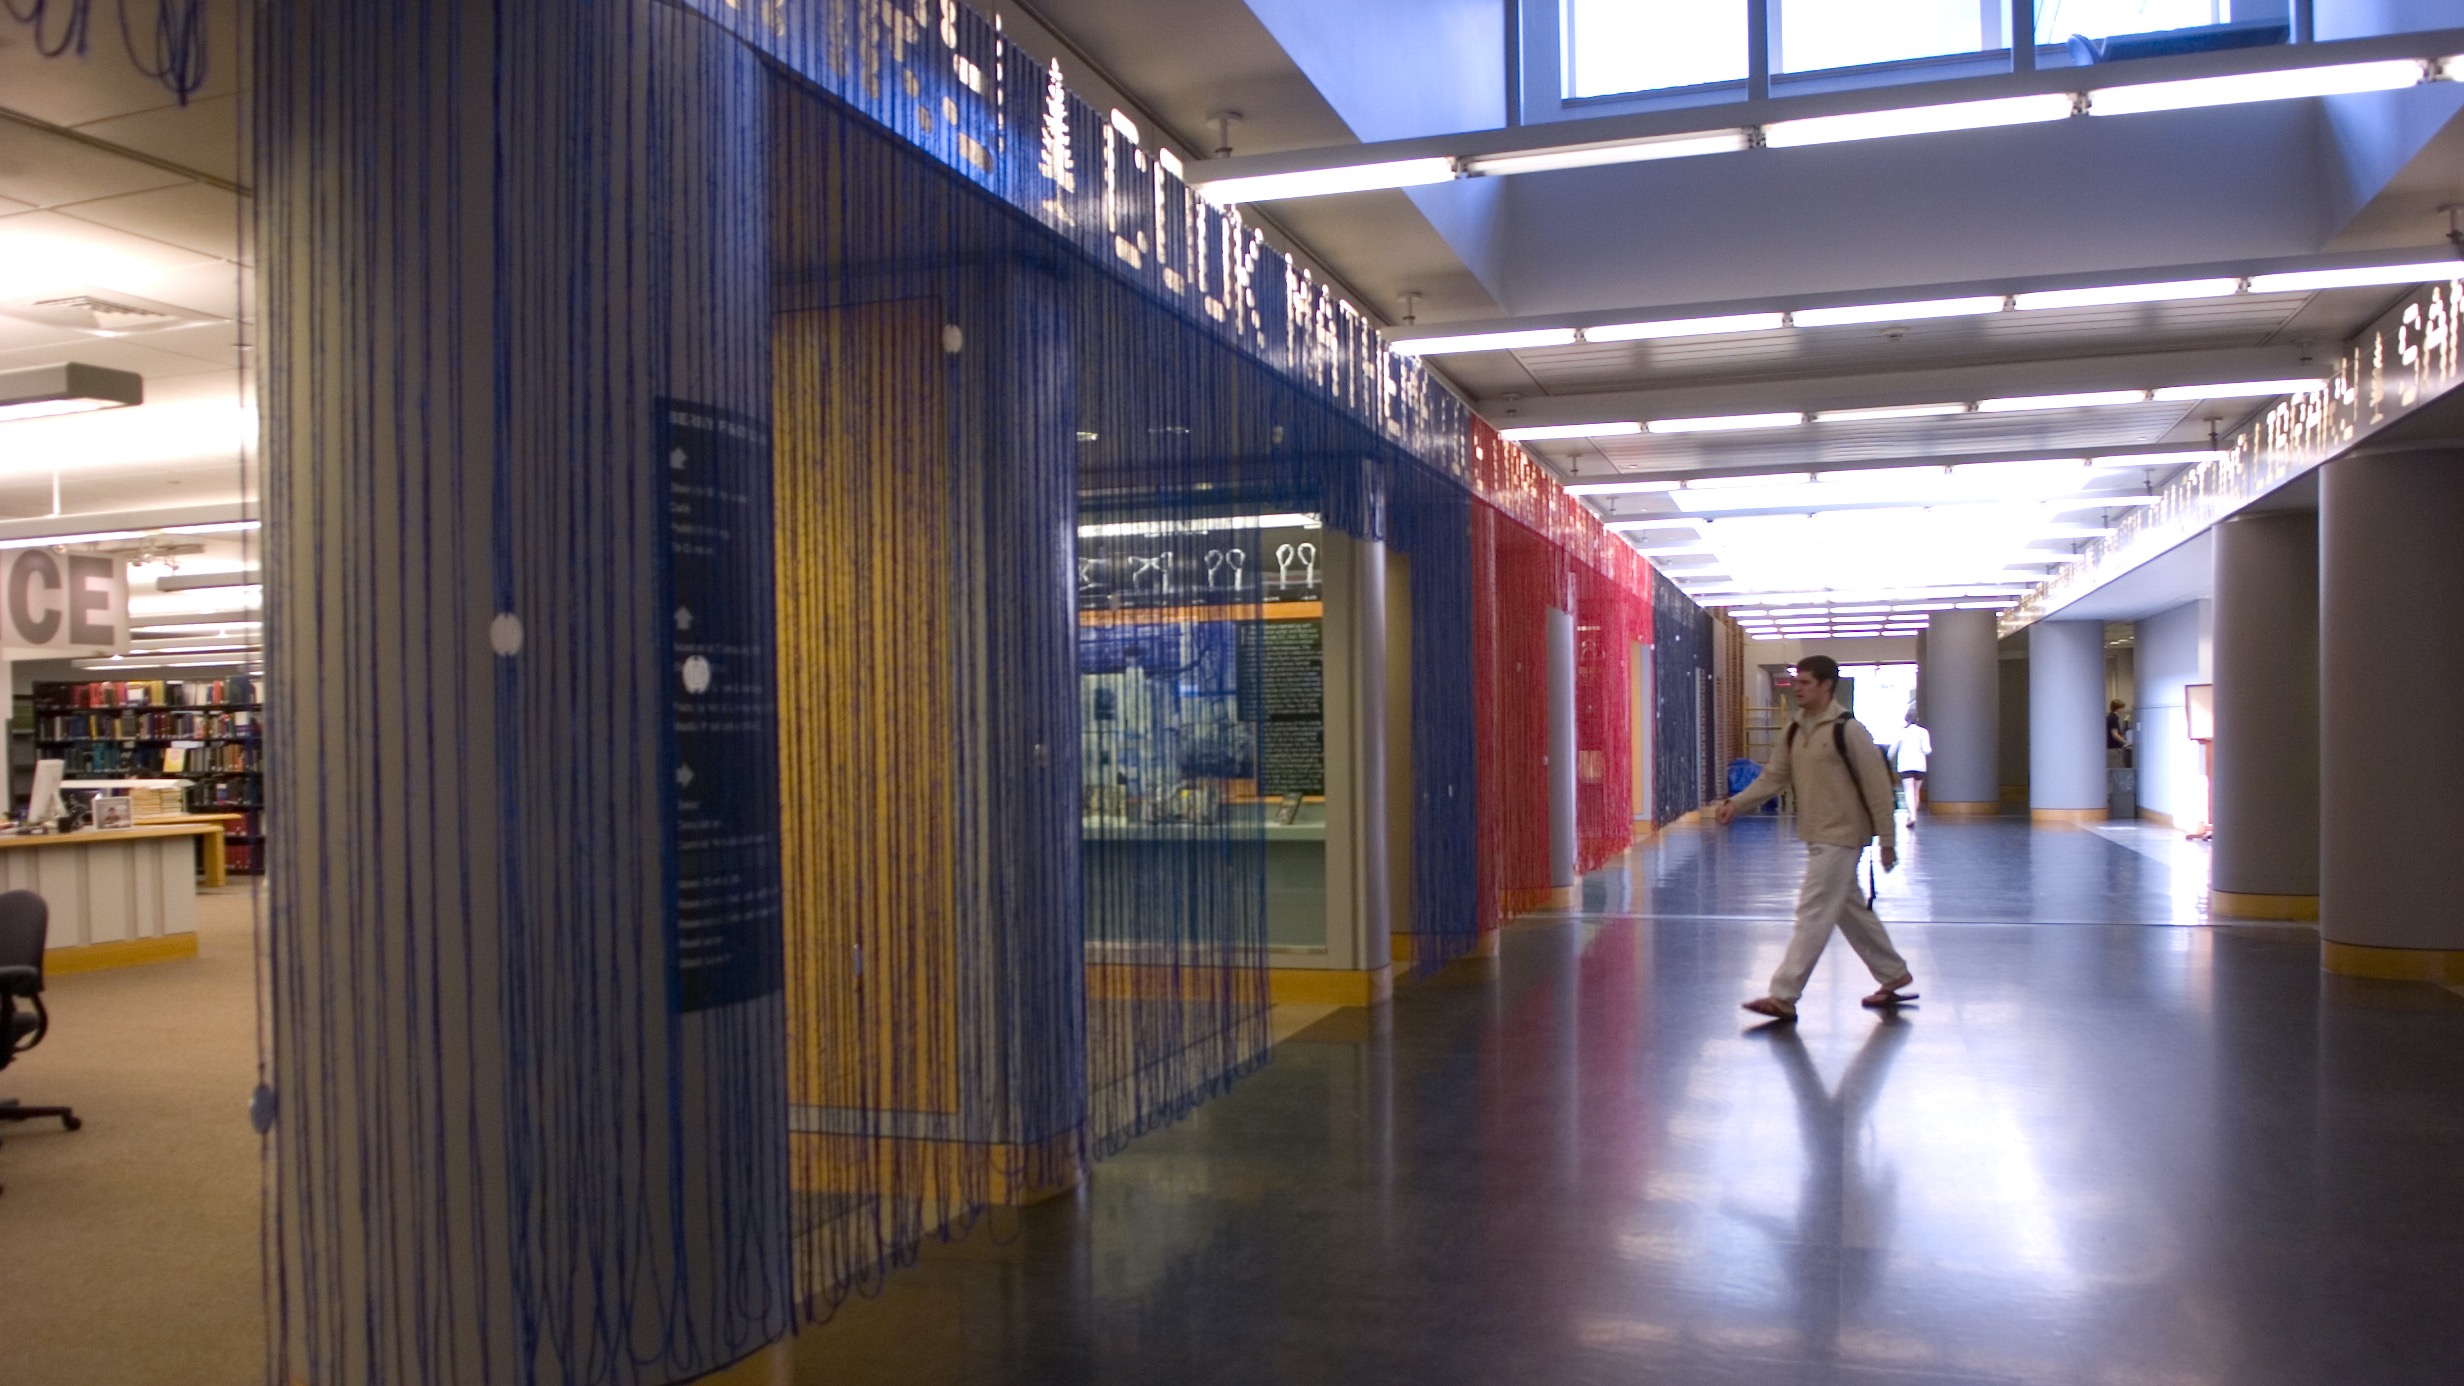 image of the interior of Baker-Berry Library